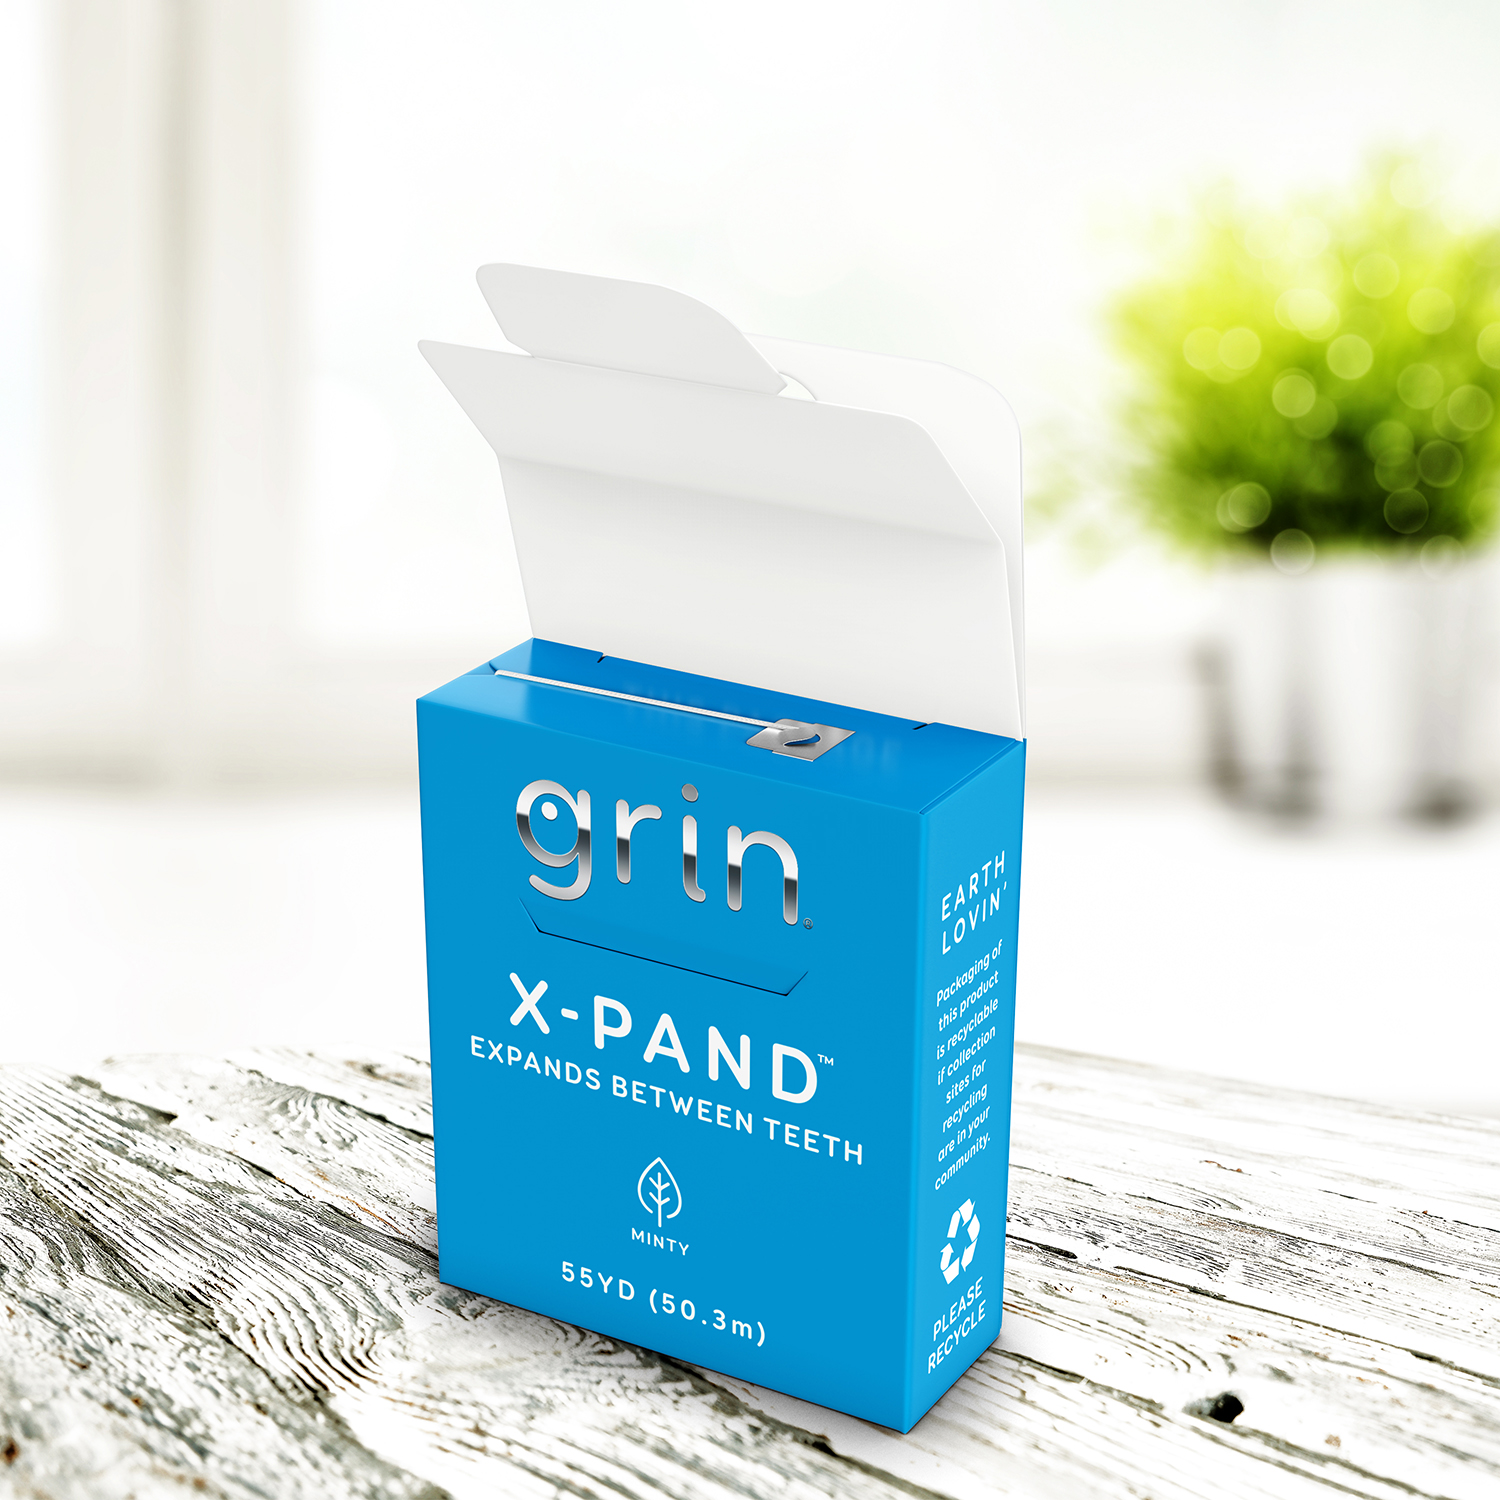 Grin Oral Care X-Pand Dental Floss